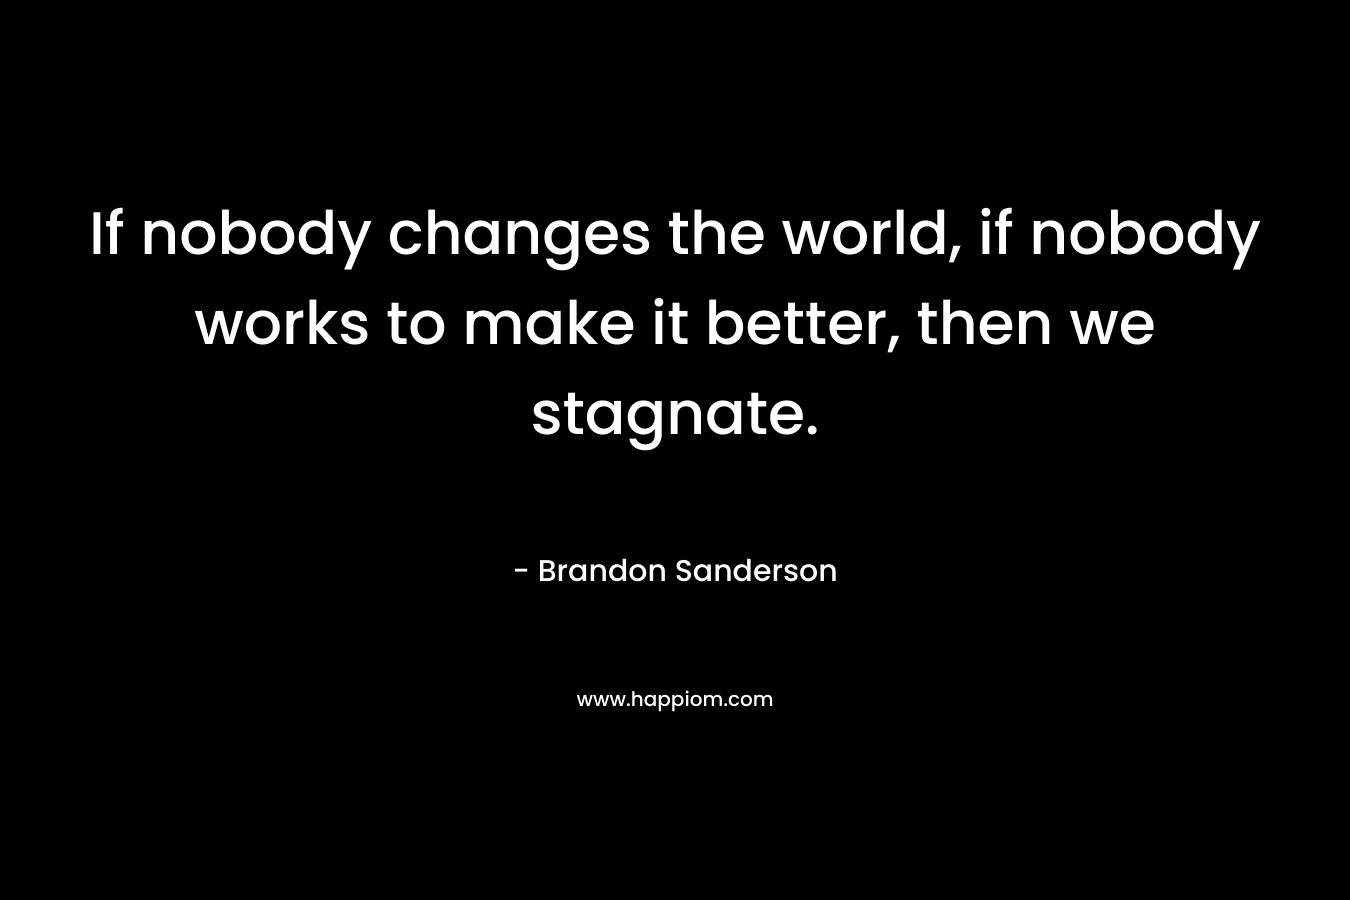 If nobody changes the world, if nobody works to make it better, then we stagnate.